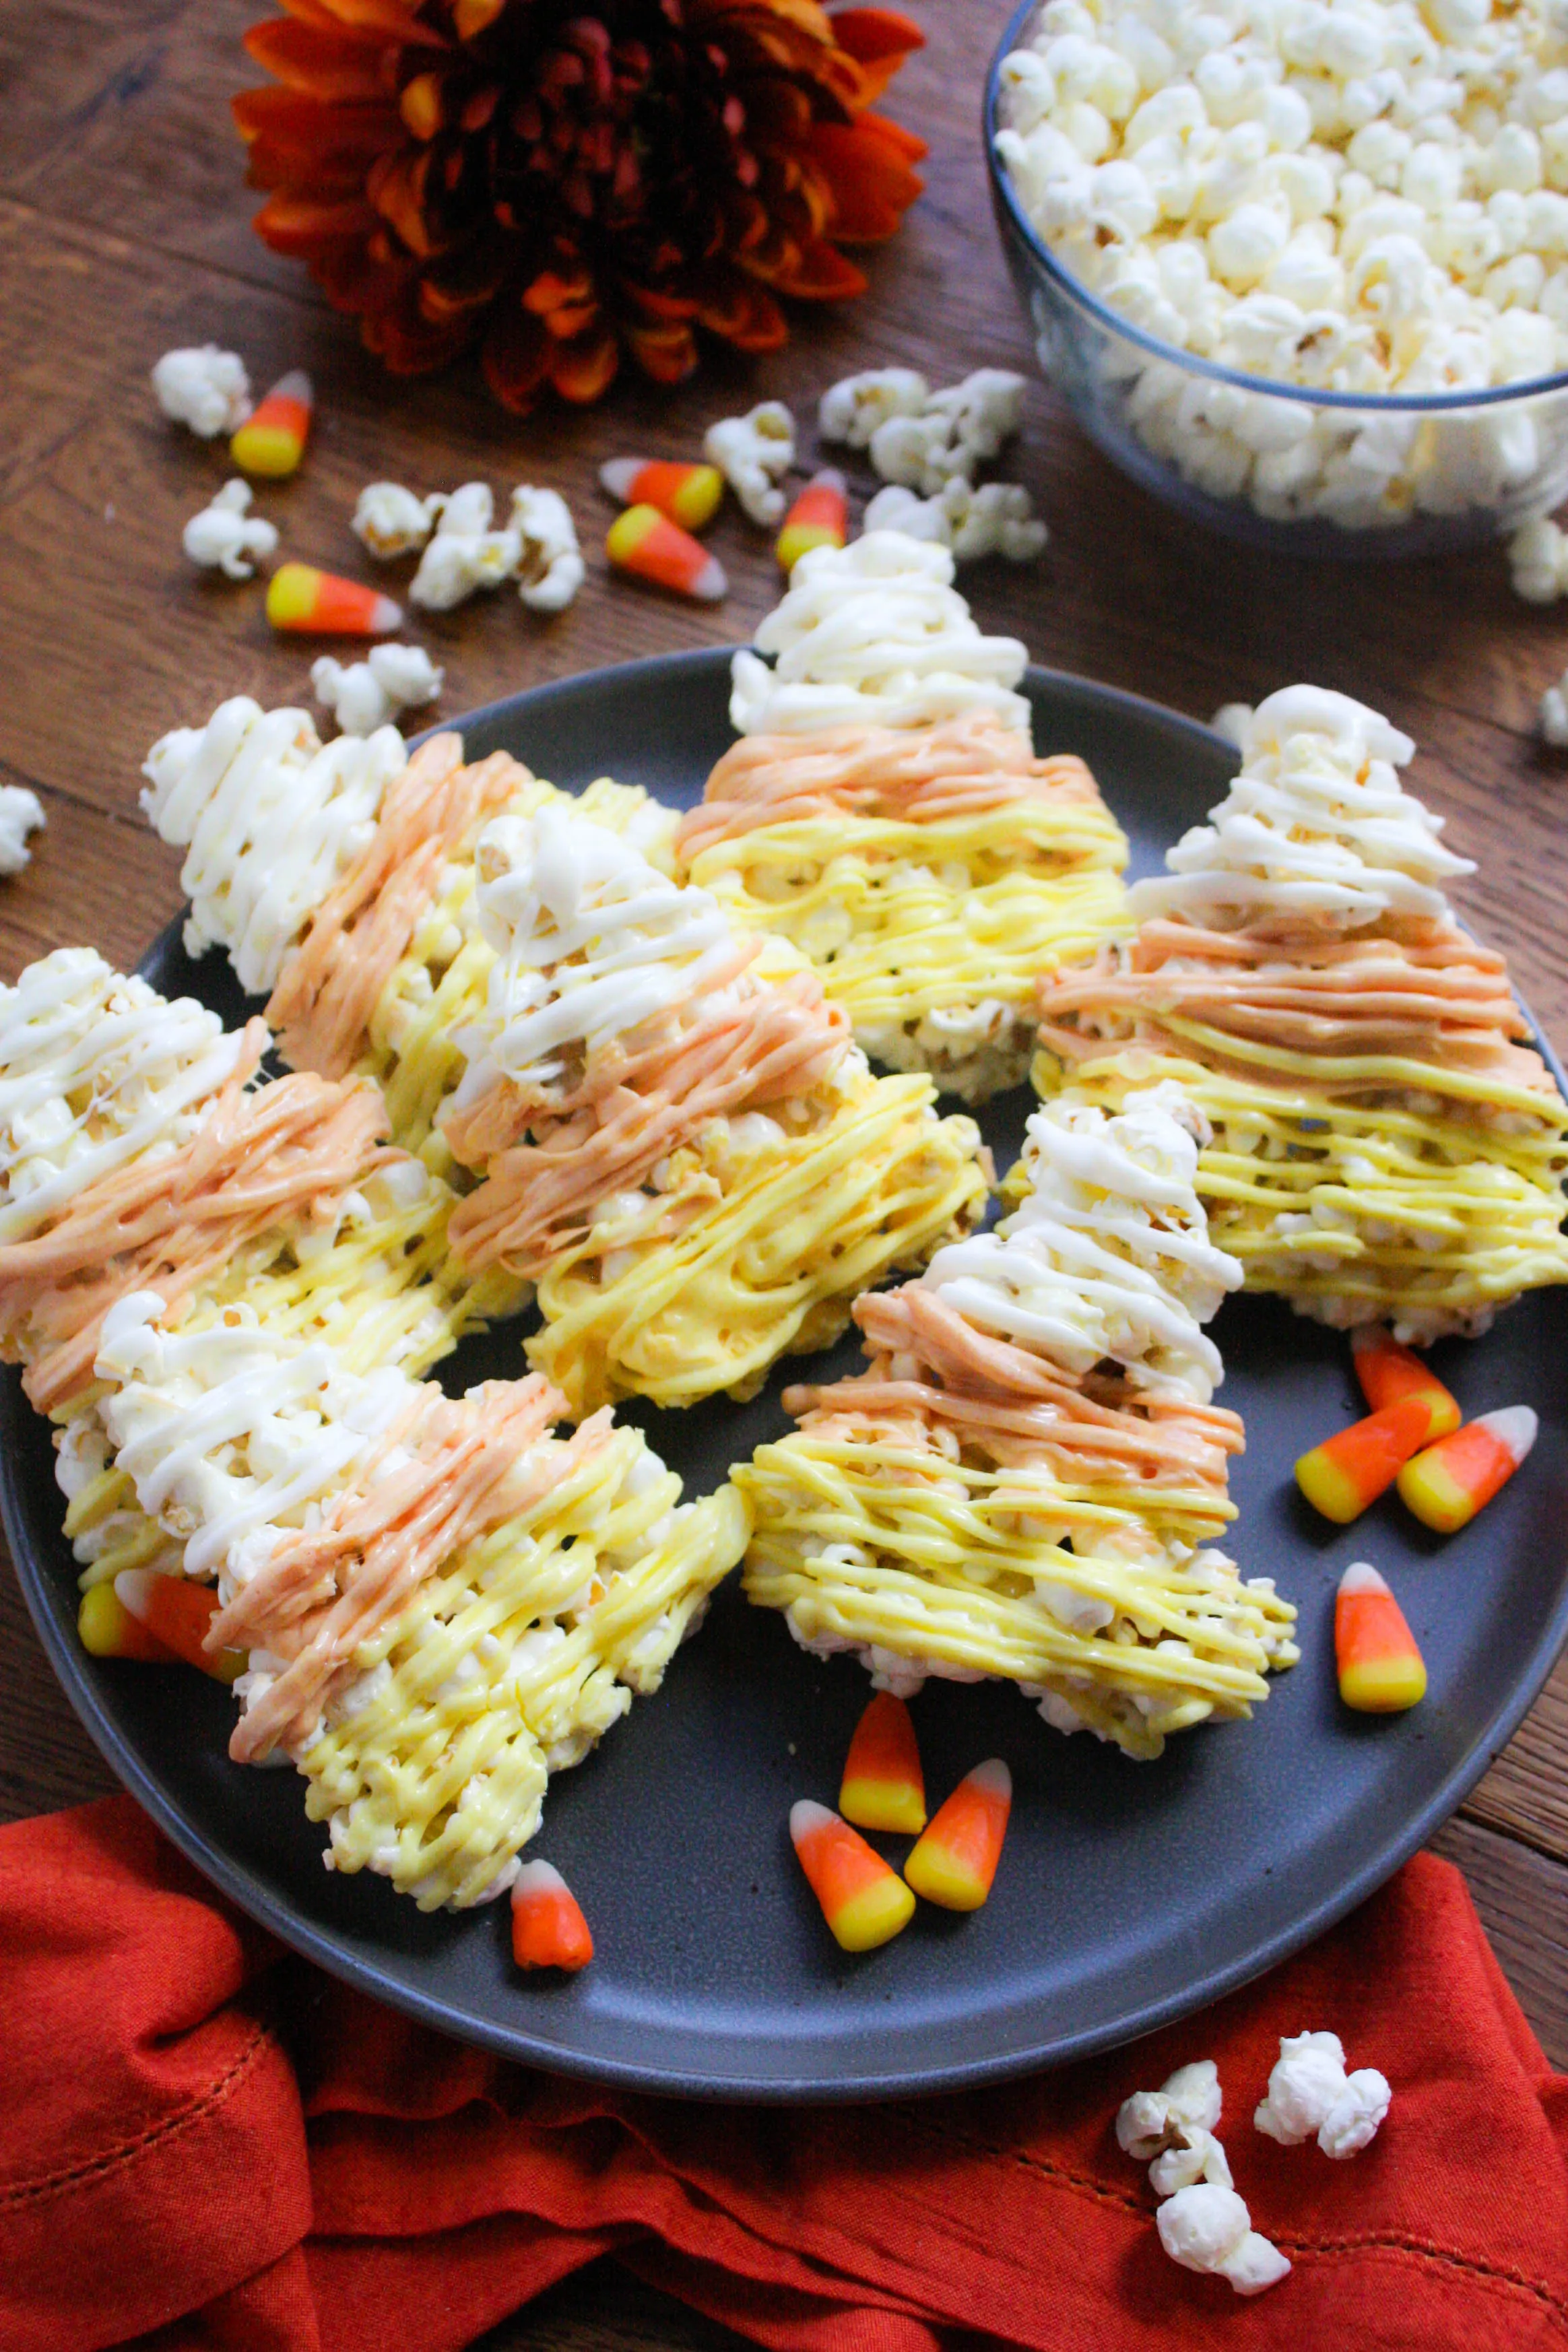 Candy Corn-Shaped Popcorn Balls are festive and fabulous for Halloween! Make these Candy Corn-Shaped Popcorn Balls for a Halloween treat! 